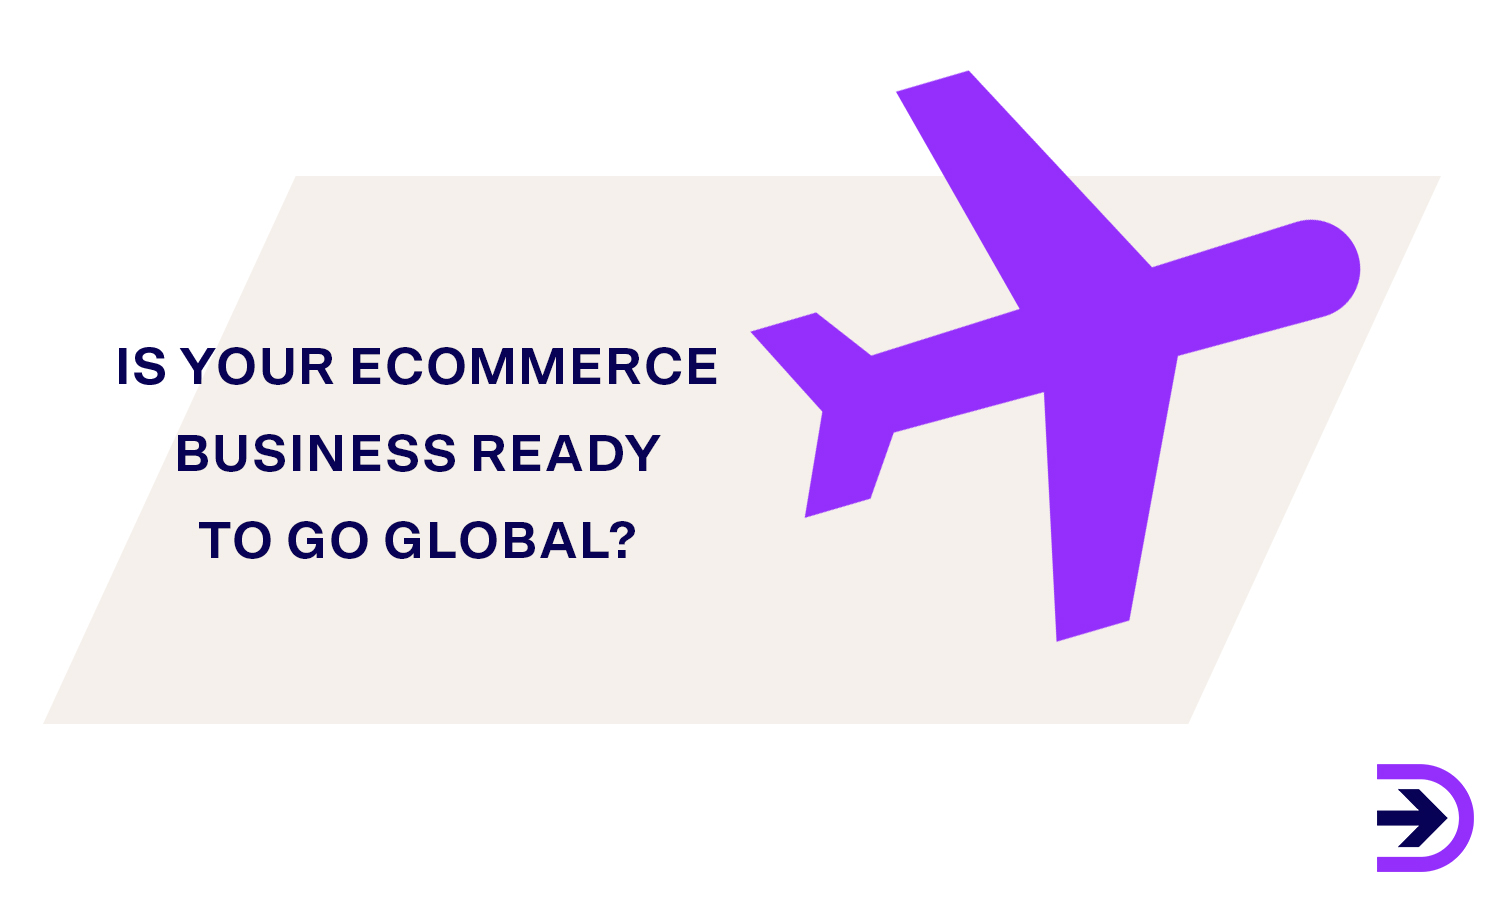 Prepare yourself for the risks and rewards when opening your business to a global market.